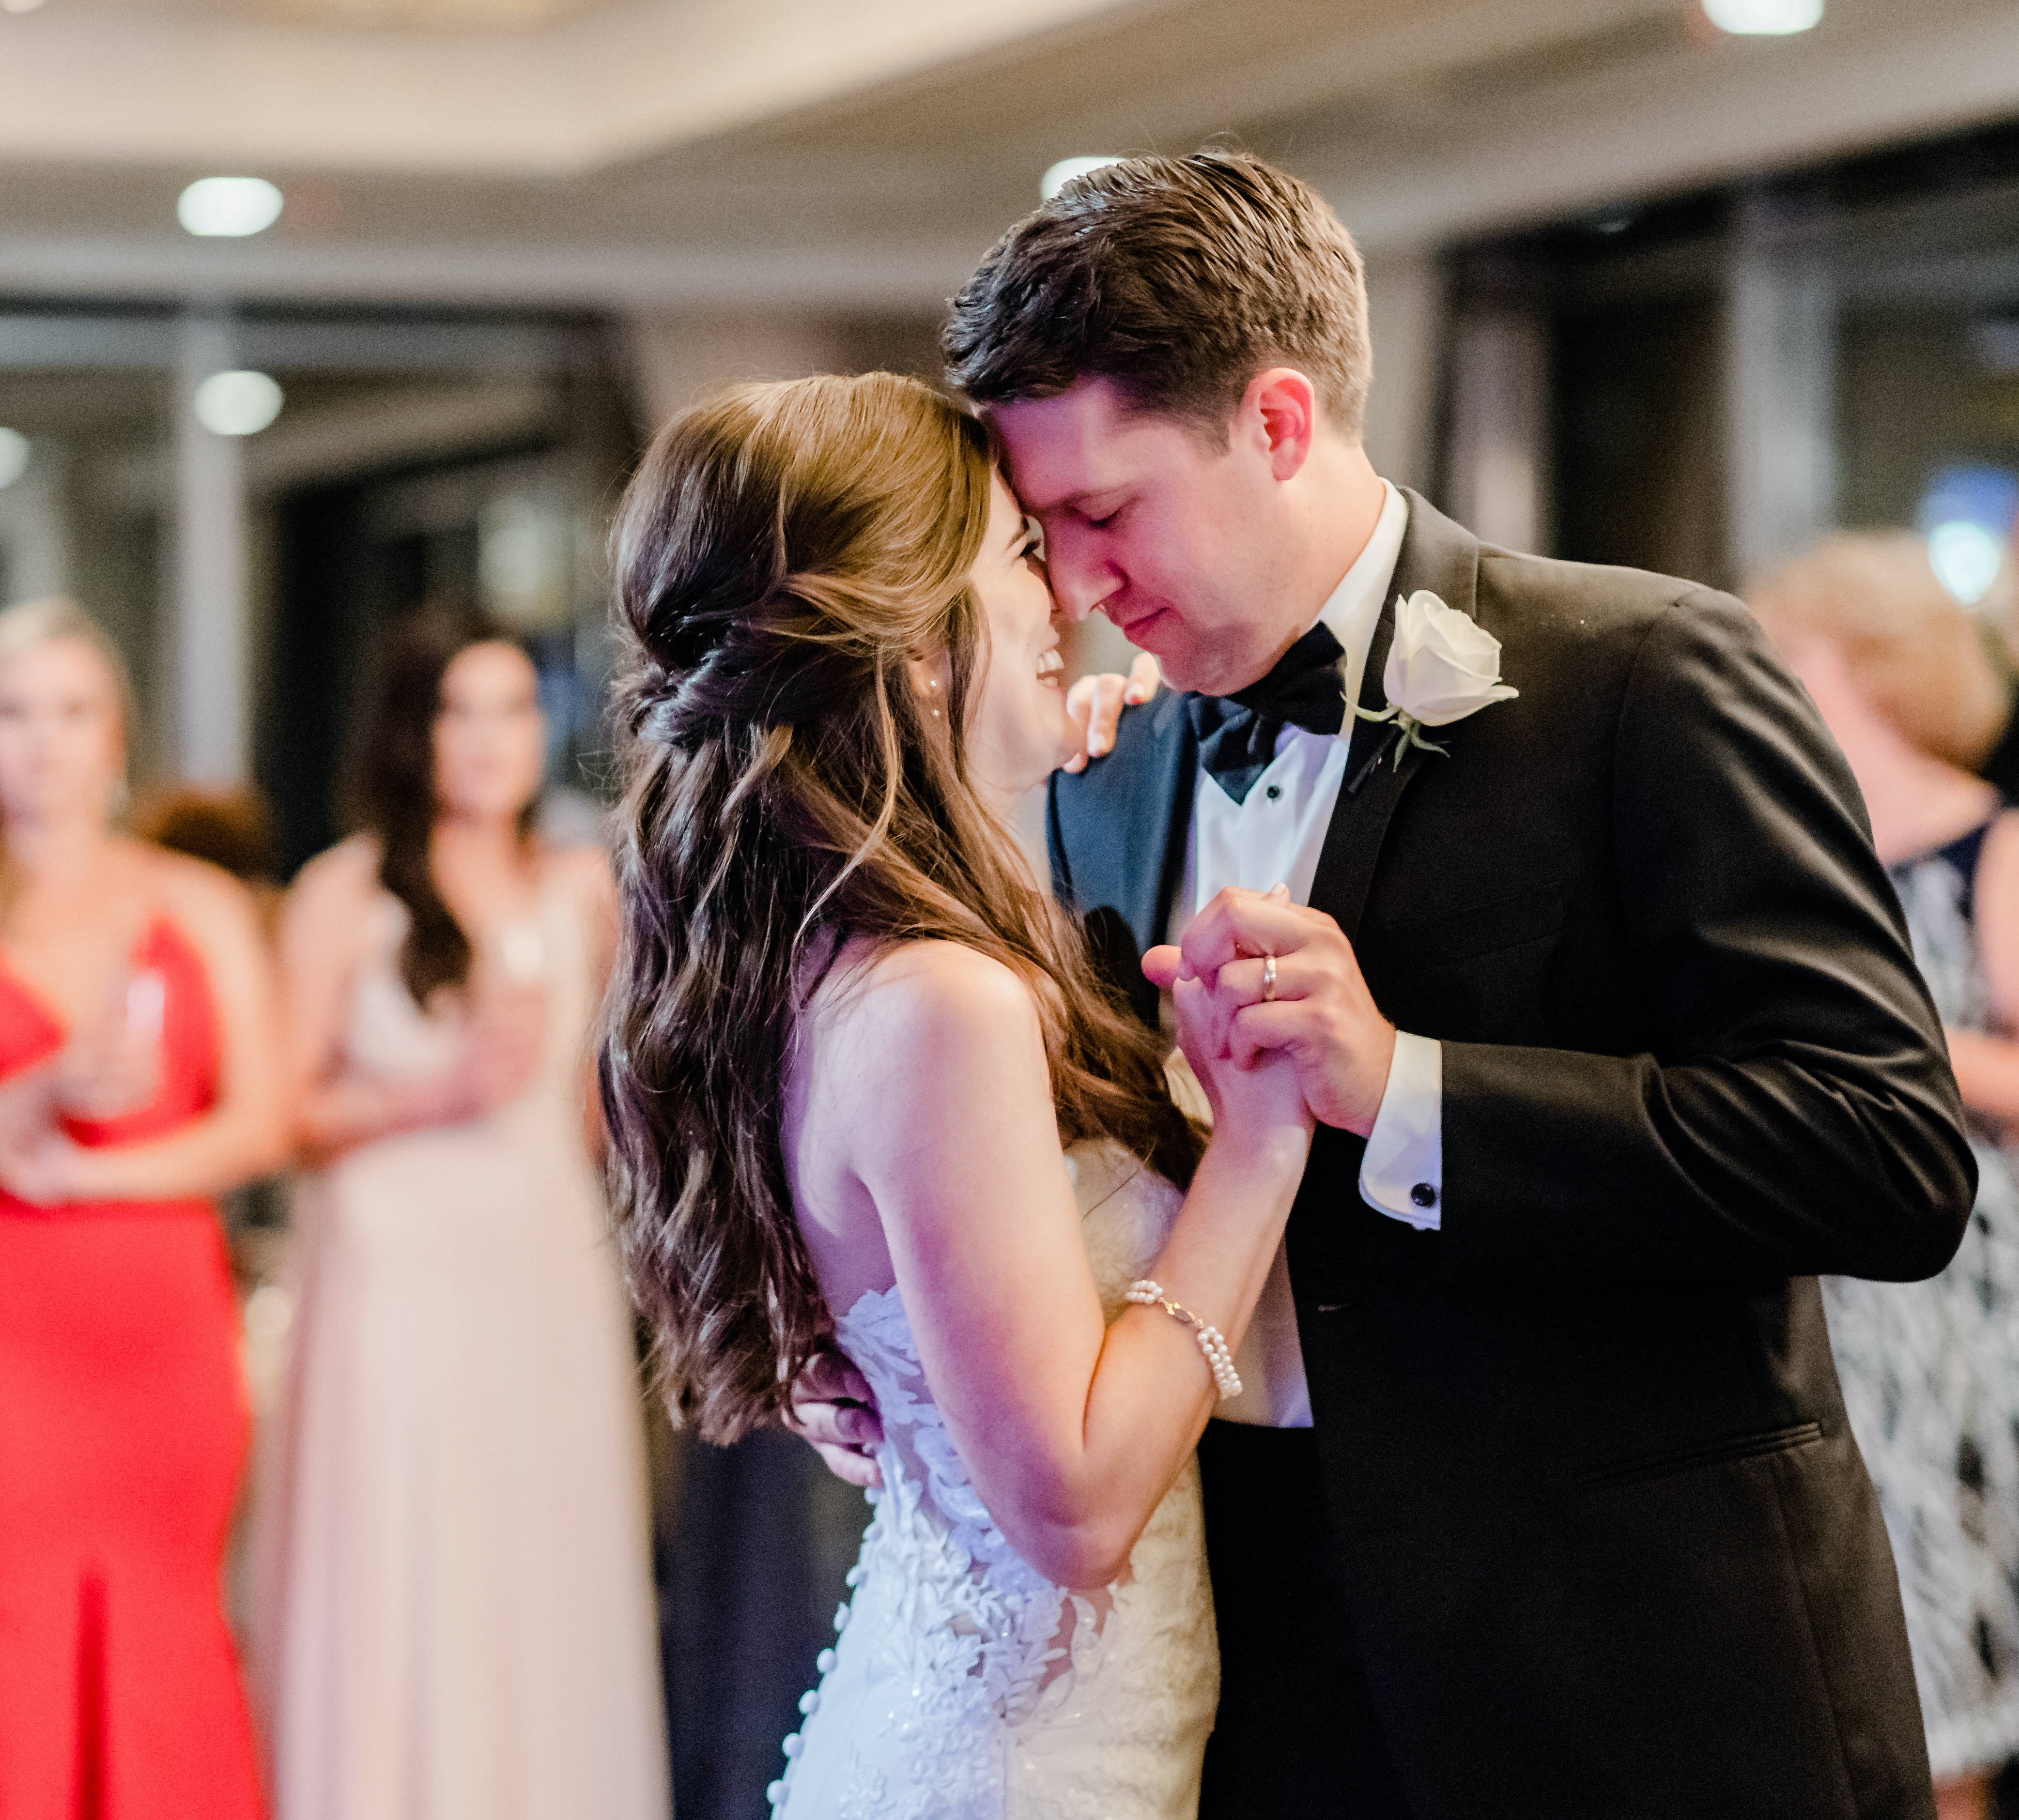 A bride and groom dance at their reception in front of their guests at The Petroleum Club of Houston.